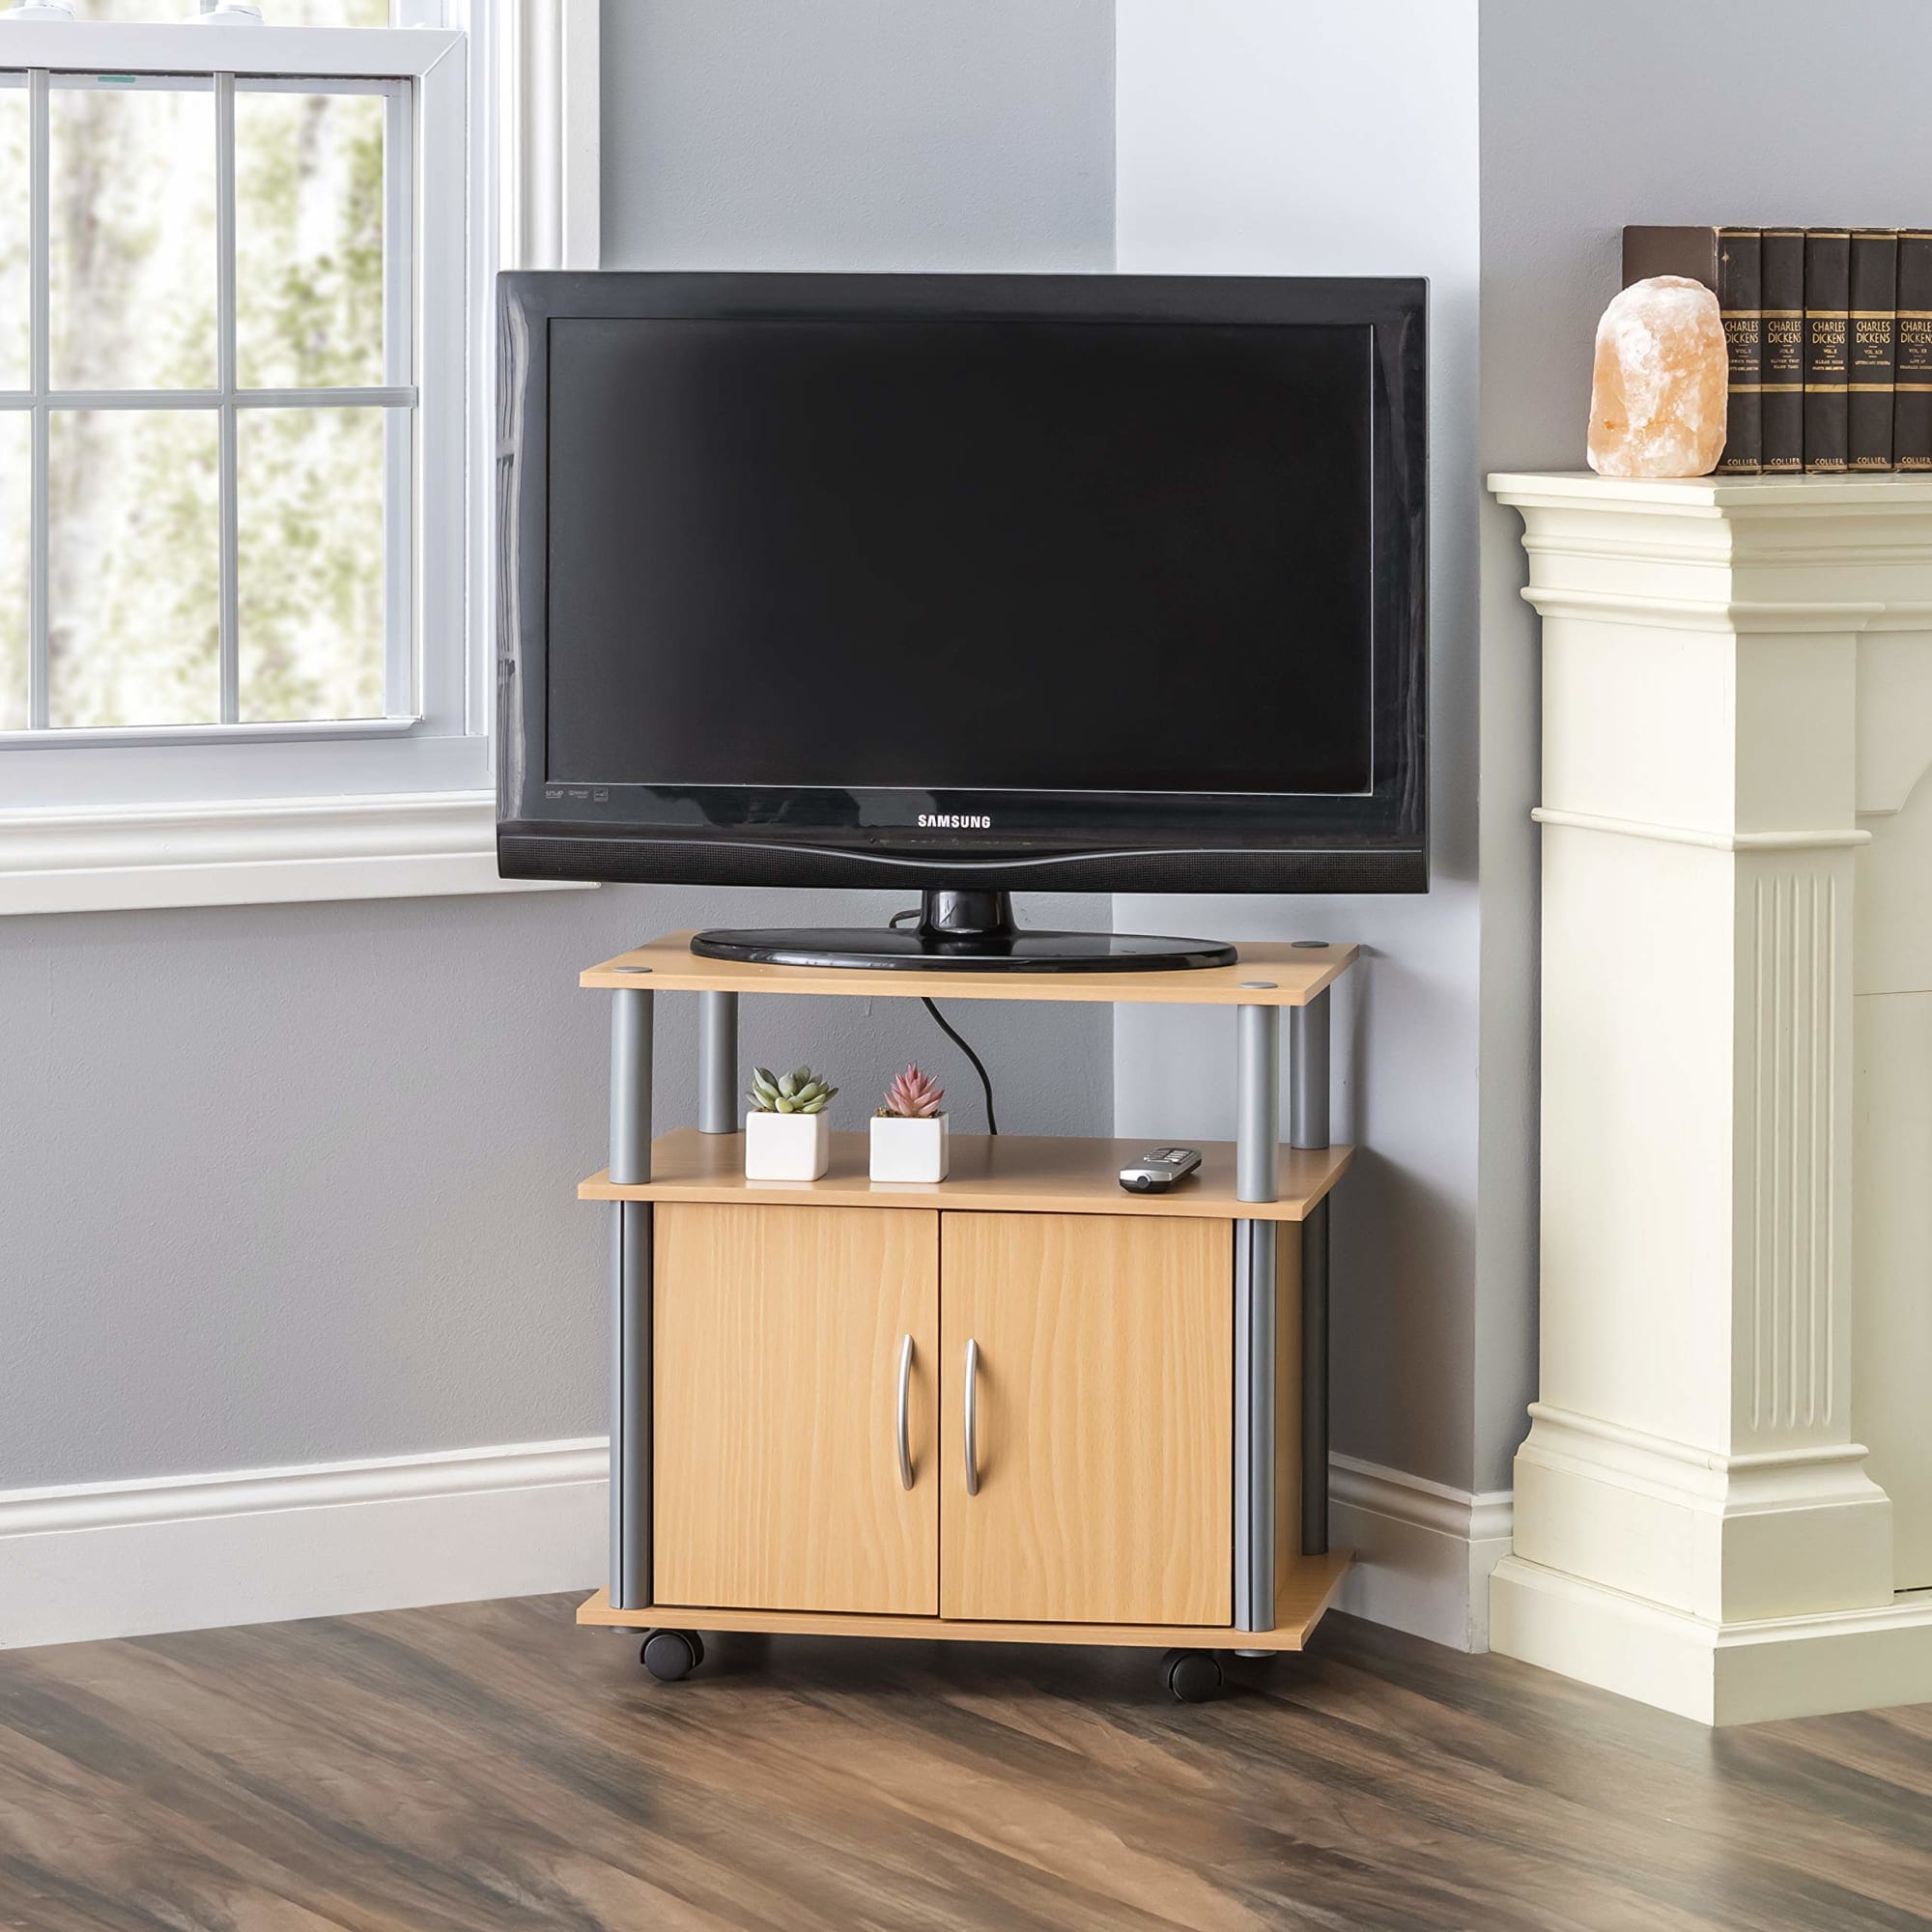 Wooden Rolling TV stand for convenience